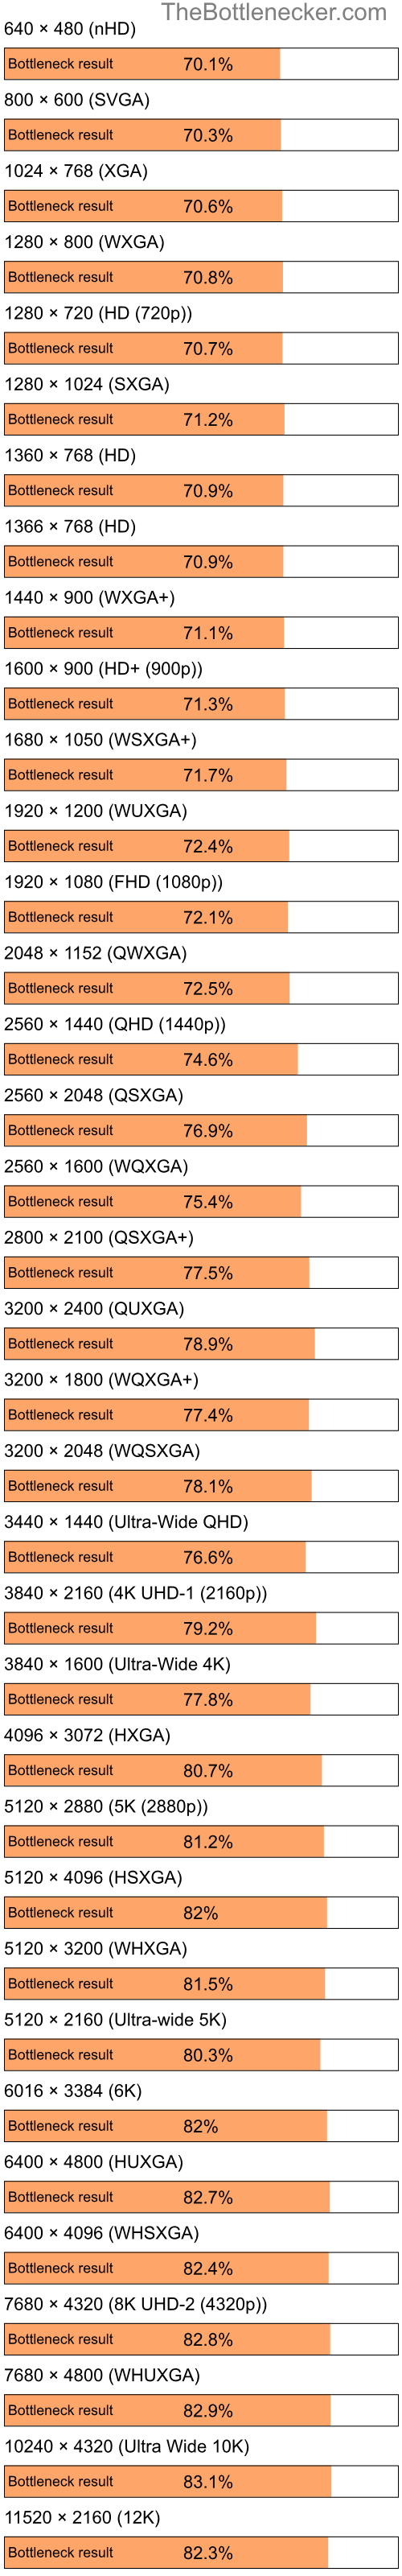 Bottleneck results by resolution for Intel Celeron M 420 and NVIDIA GeForce 8300 in Graphic Card Intense Tasks